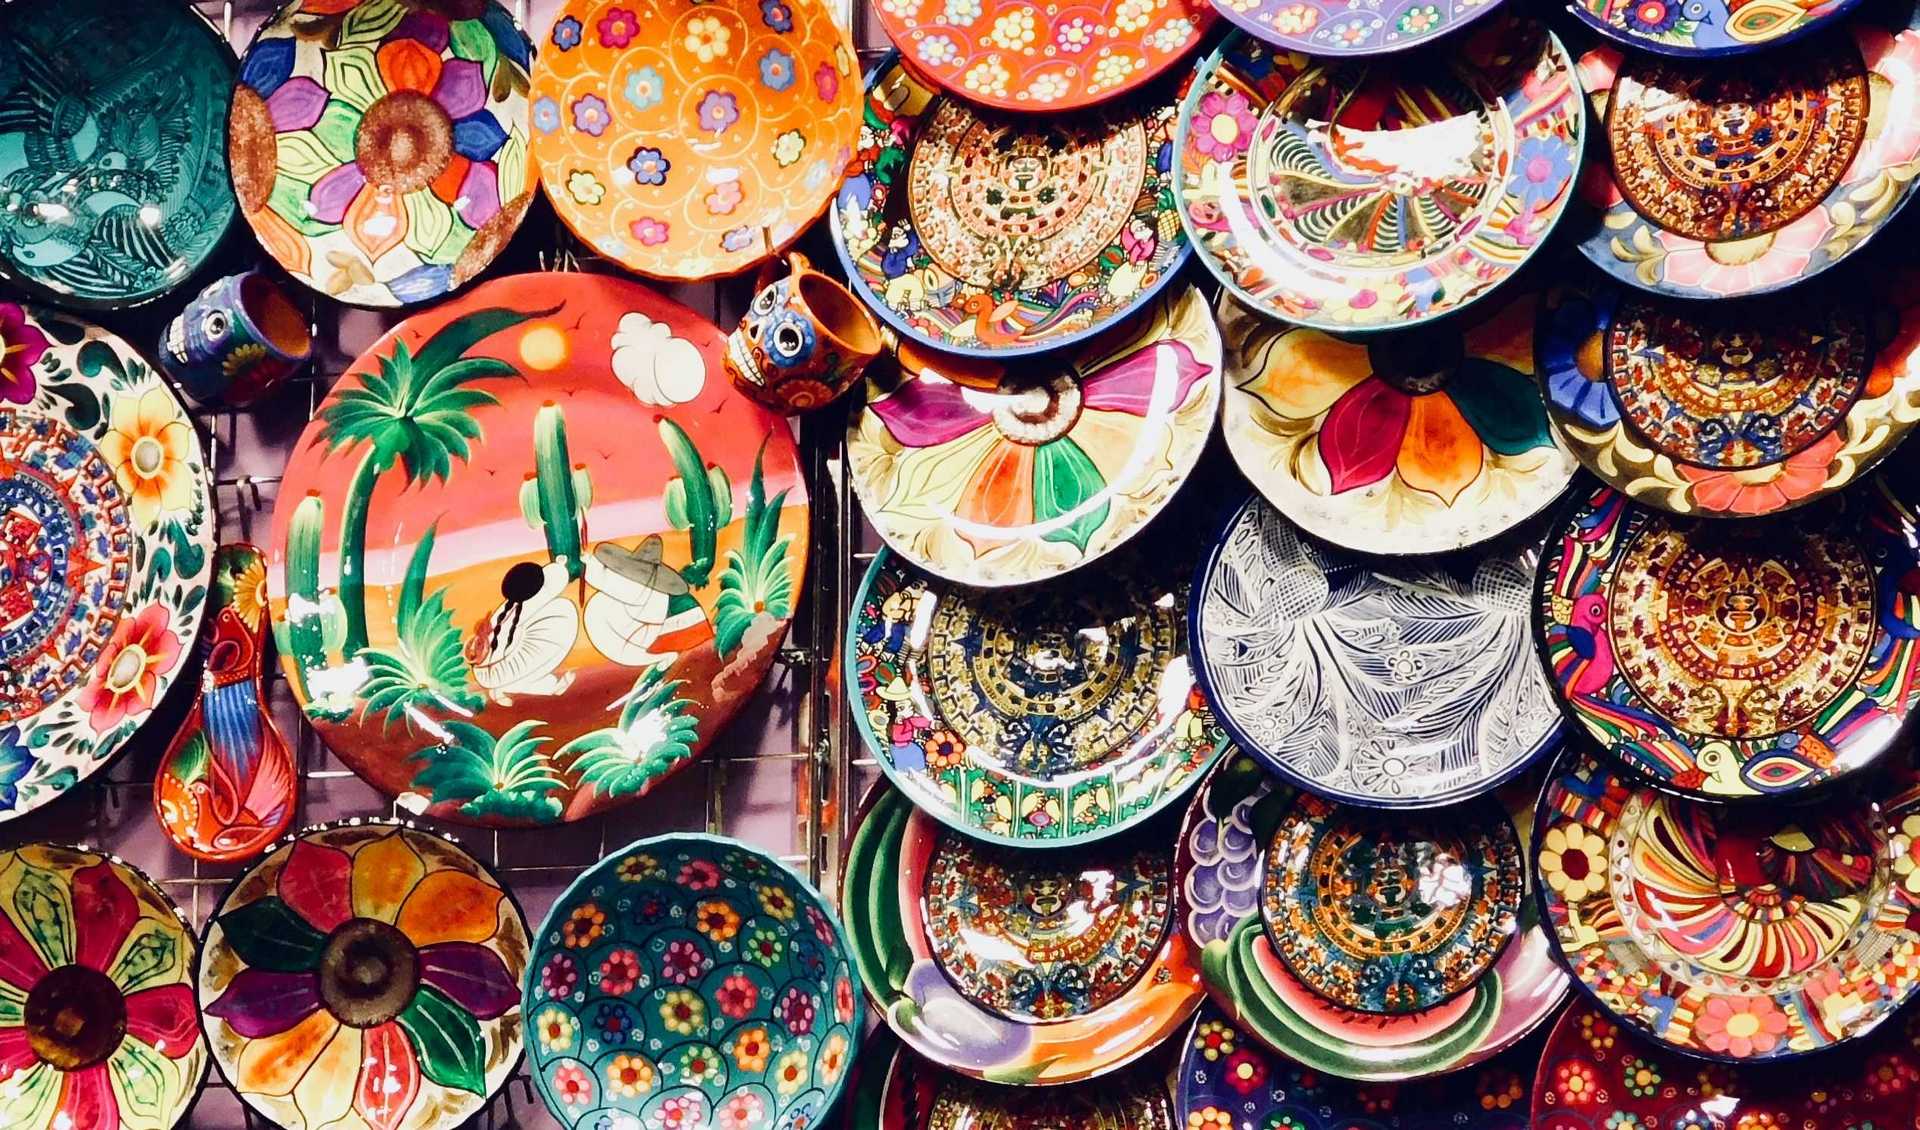 What to Buy in Mallorca: The 19 Best Souvenirs for Adults and Kids